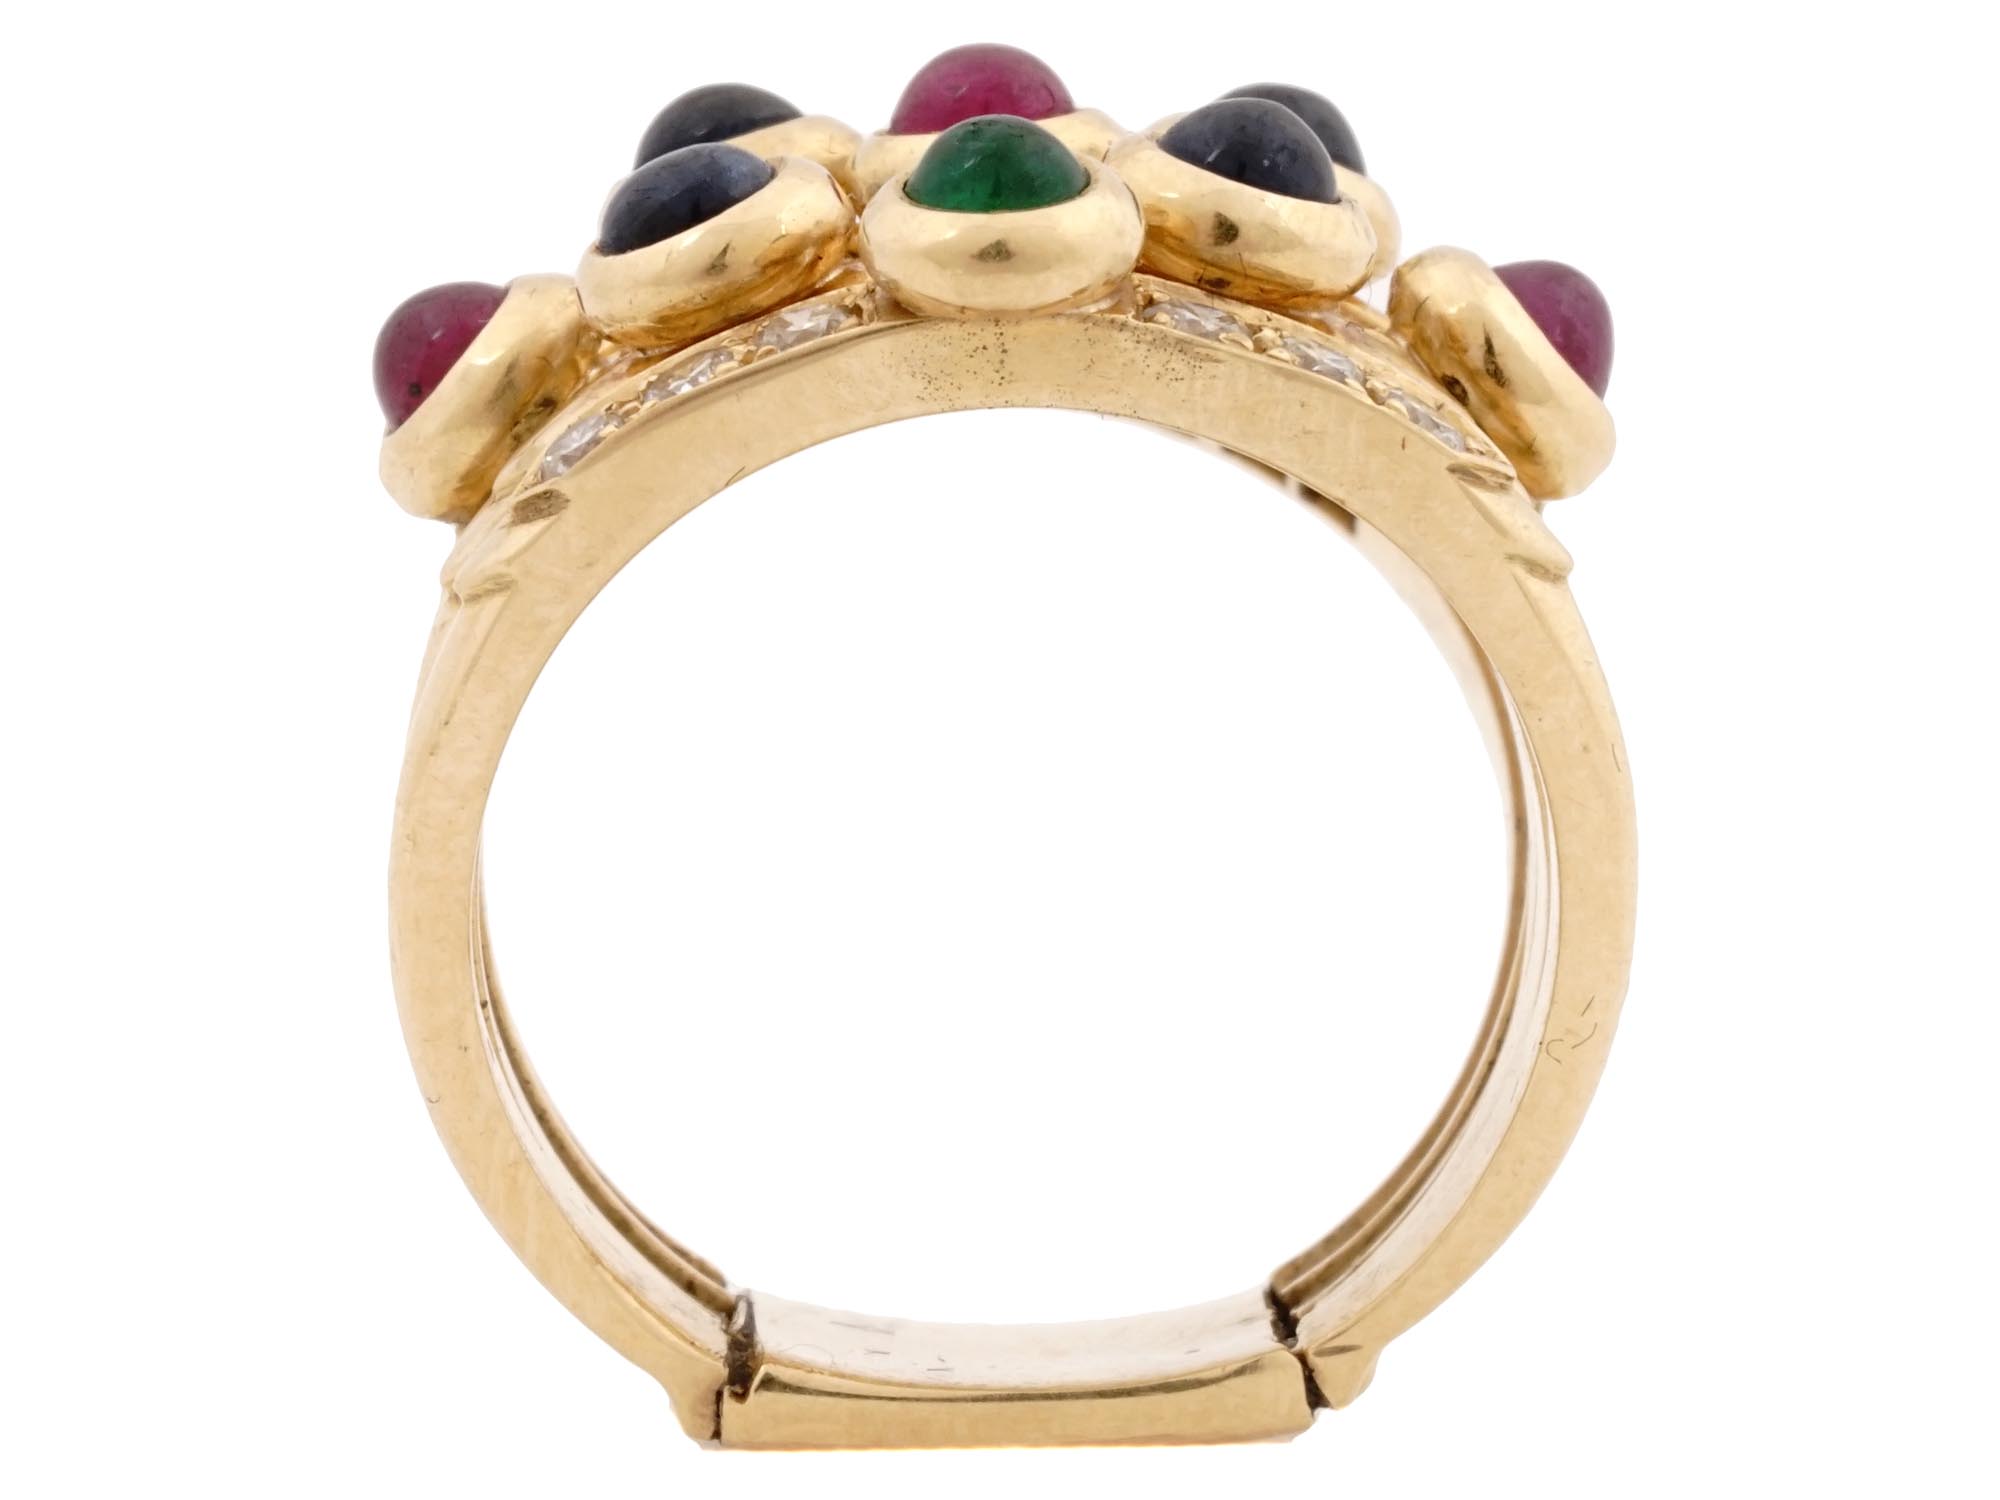 VINTAGE 18K GOLD GEMSTONE CLUSTER RING WITH STONES PIC-5